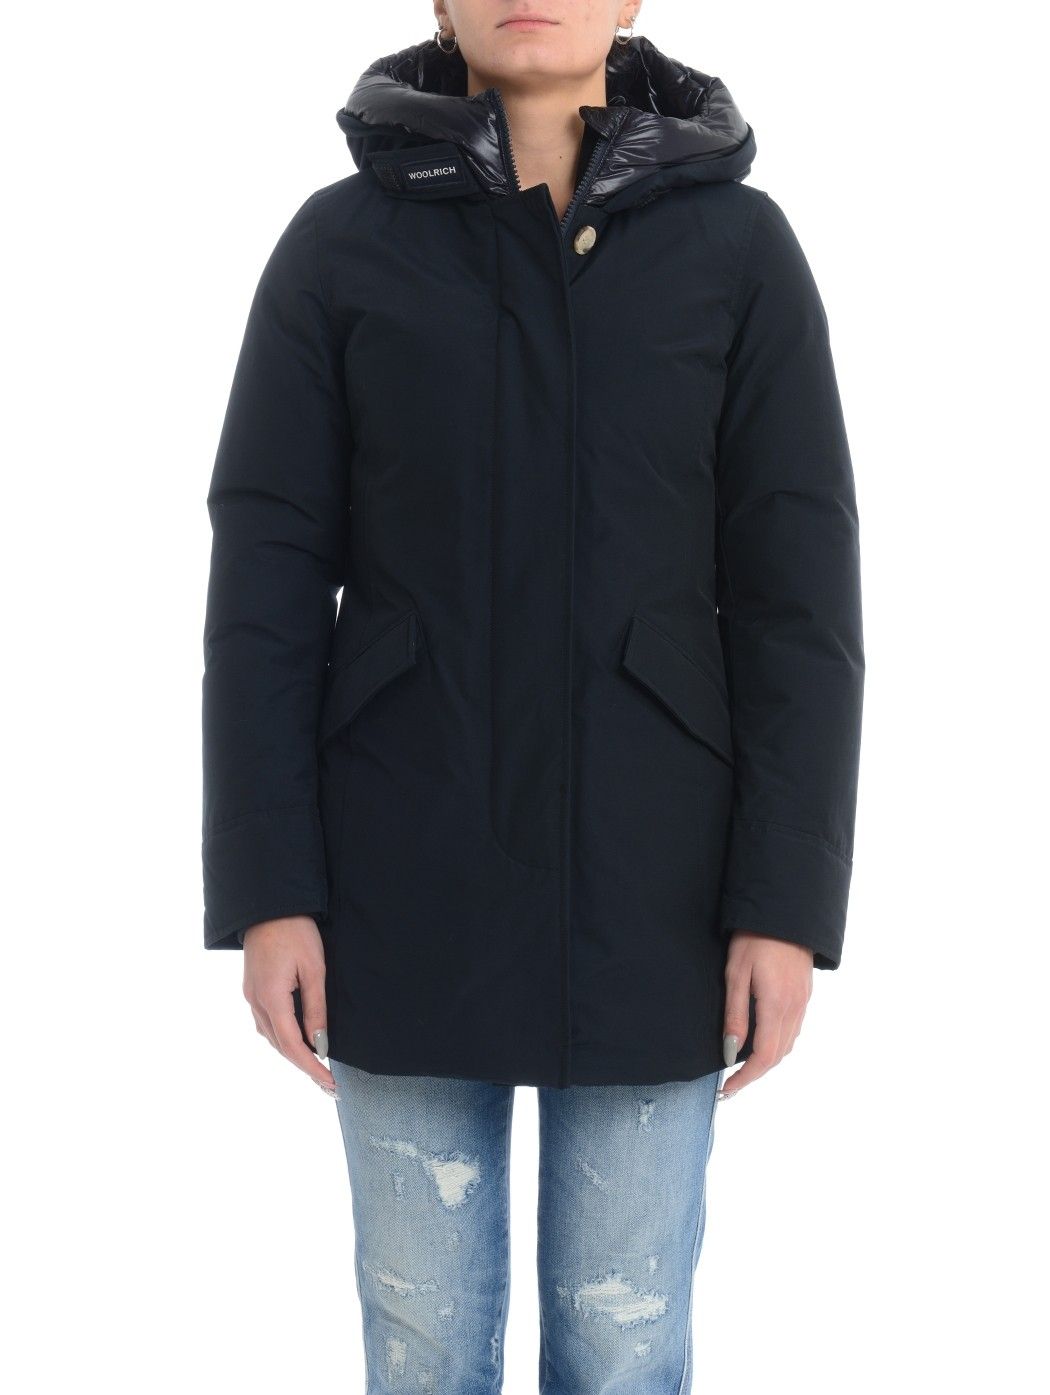  down jackets,removable hoods,WOMEN DOWN JACKETS,MONCLER PADDED JACKETS,WOOLRICH ARCTIC PARKA,HERNO DOWN JACKETS  WOOLRICH WWOU0300FR